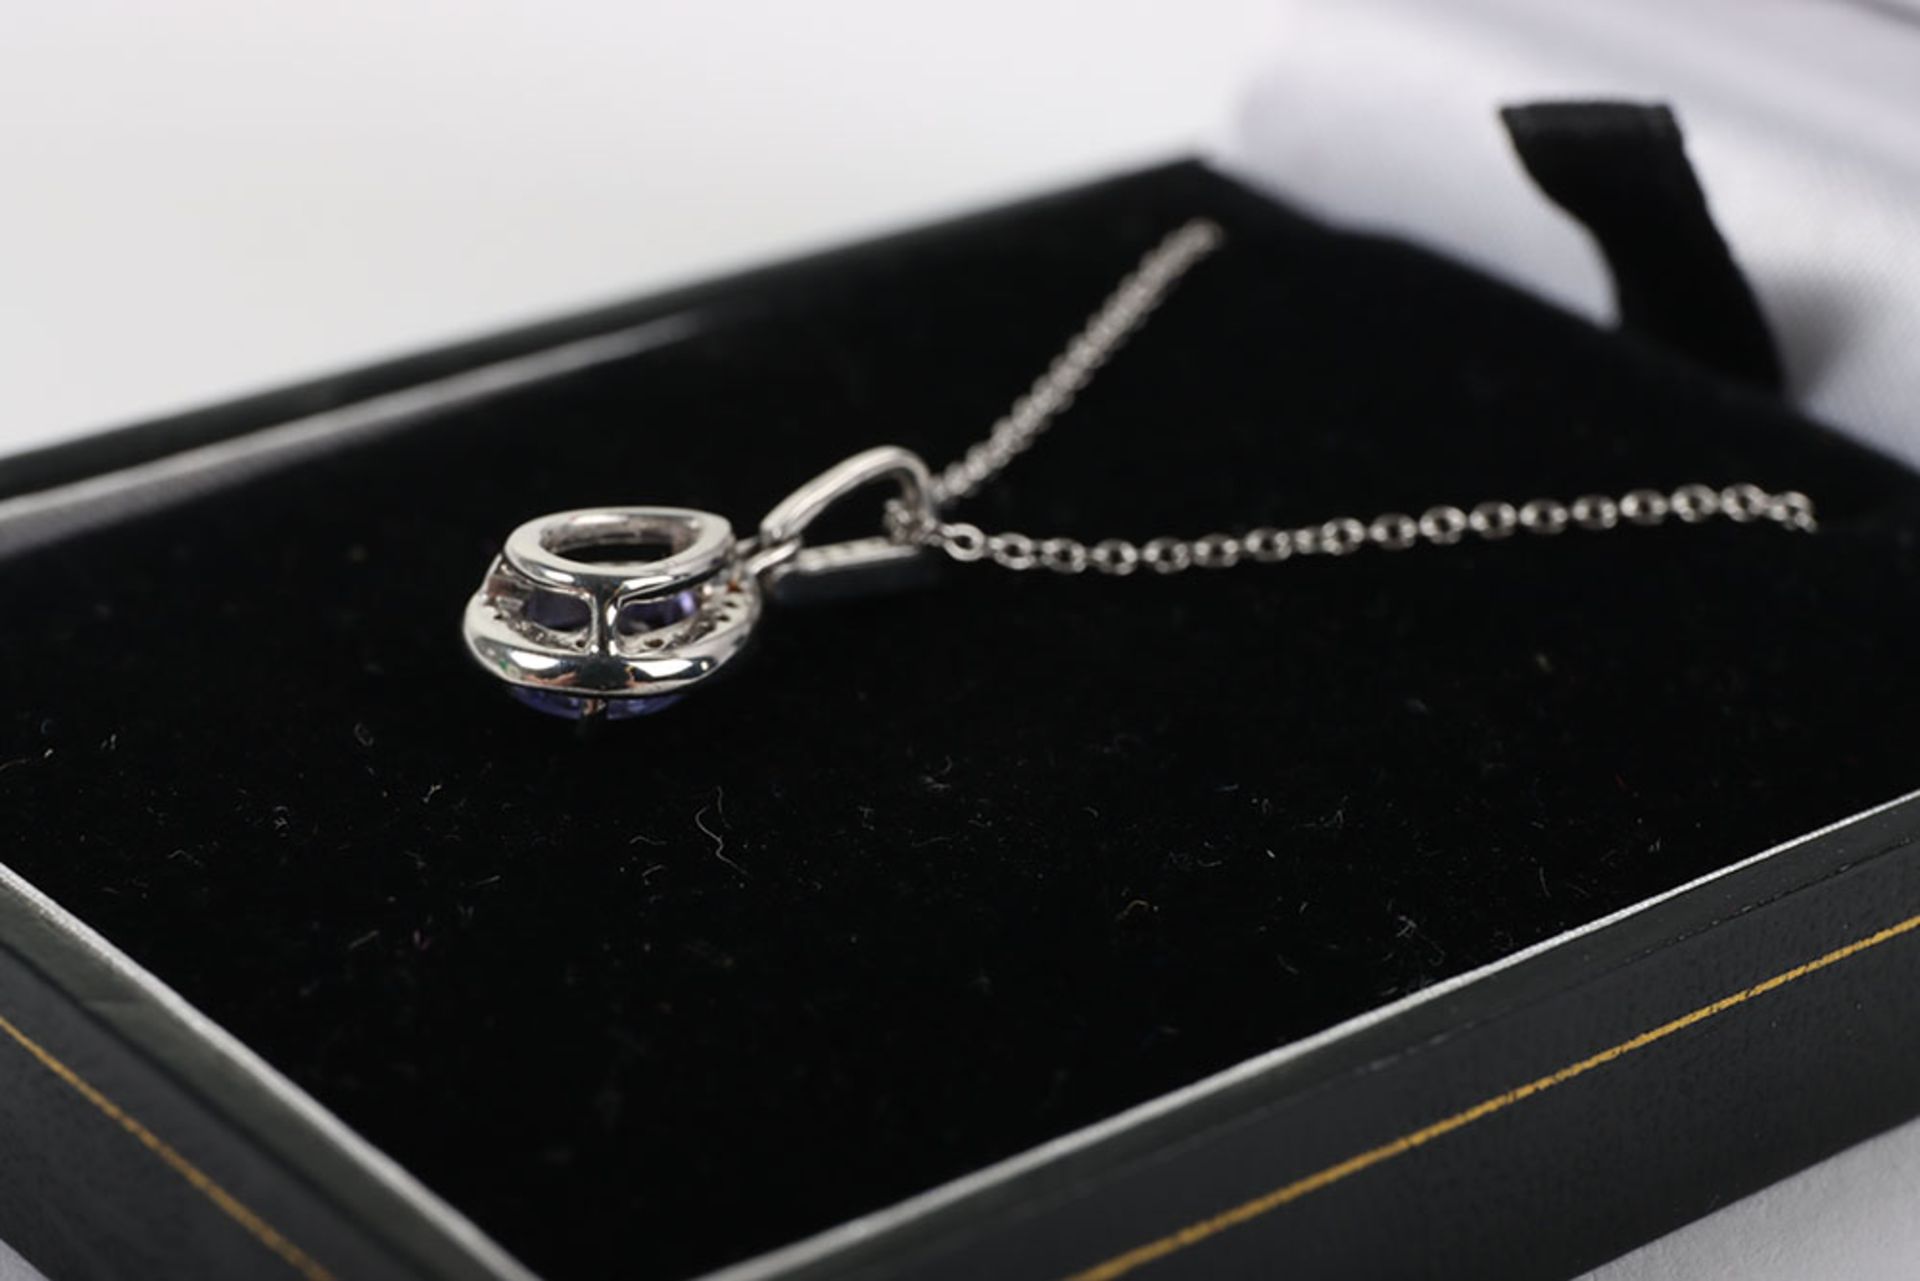 An 18ct white gold diamond and tanzanite pendant necklace - Image 3 of 4